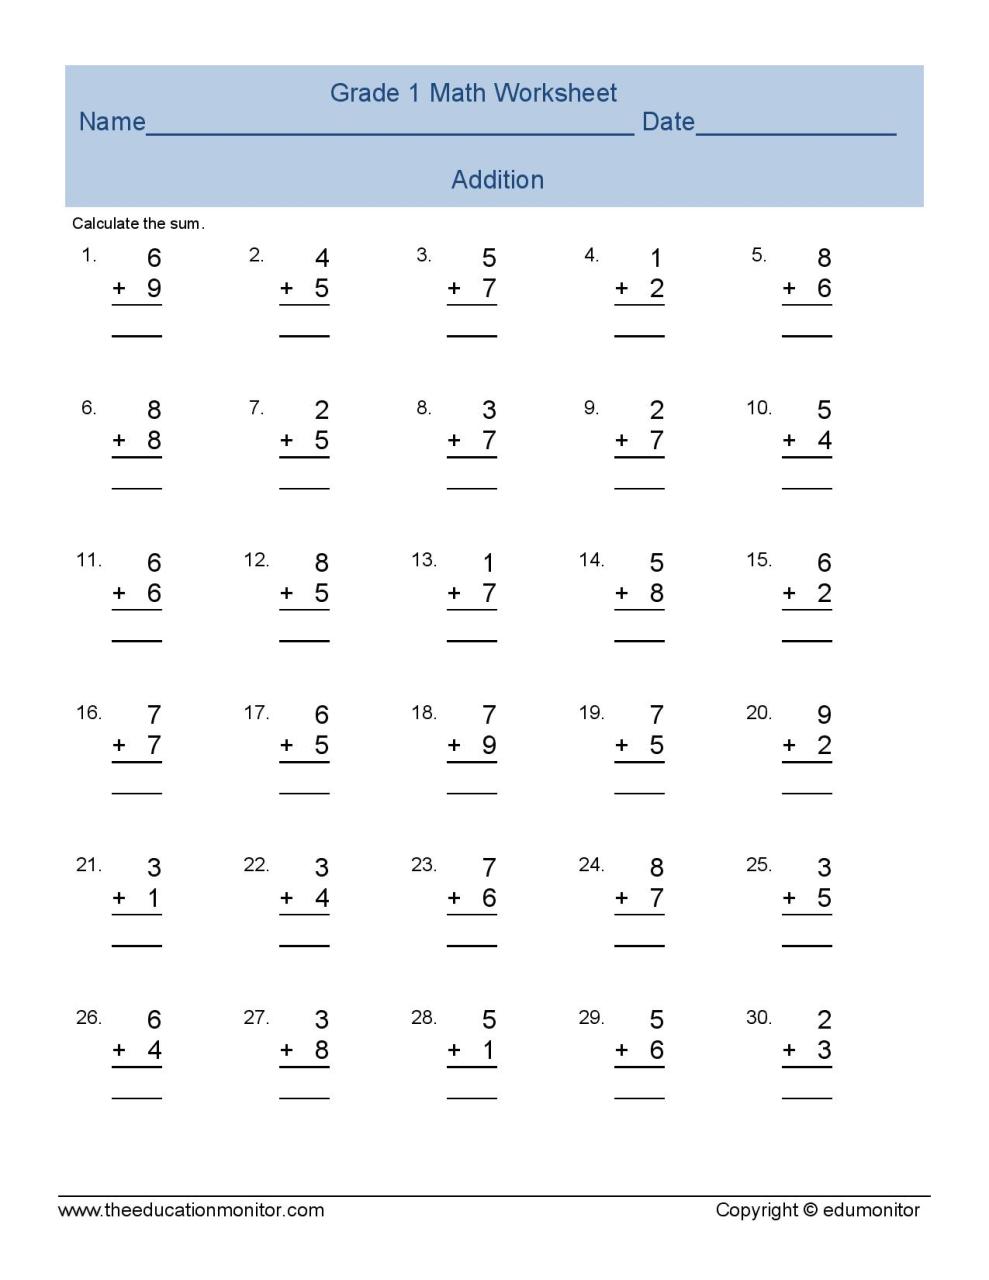 First grade addition math worksheets for all kids, more